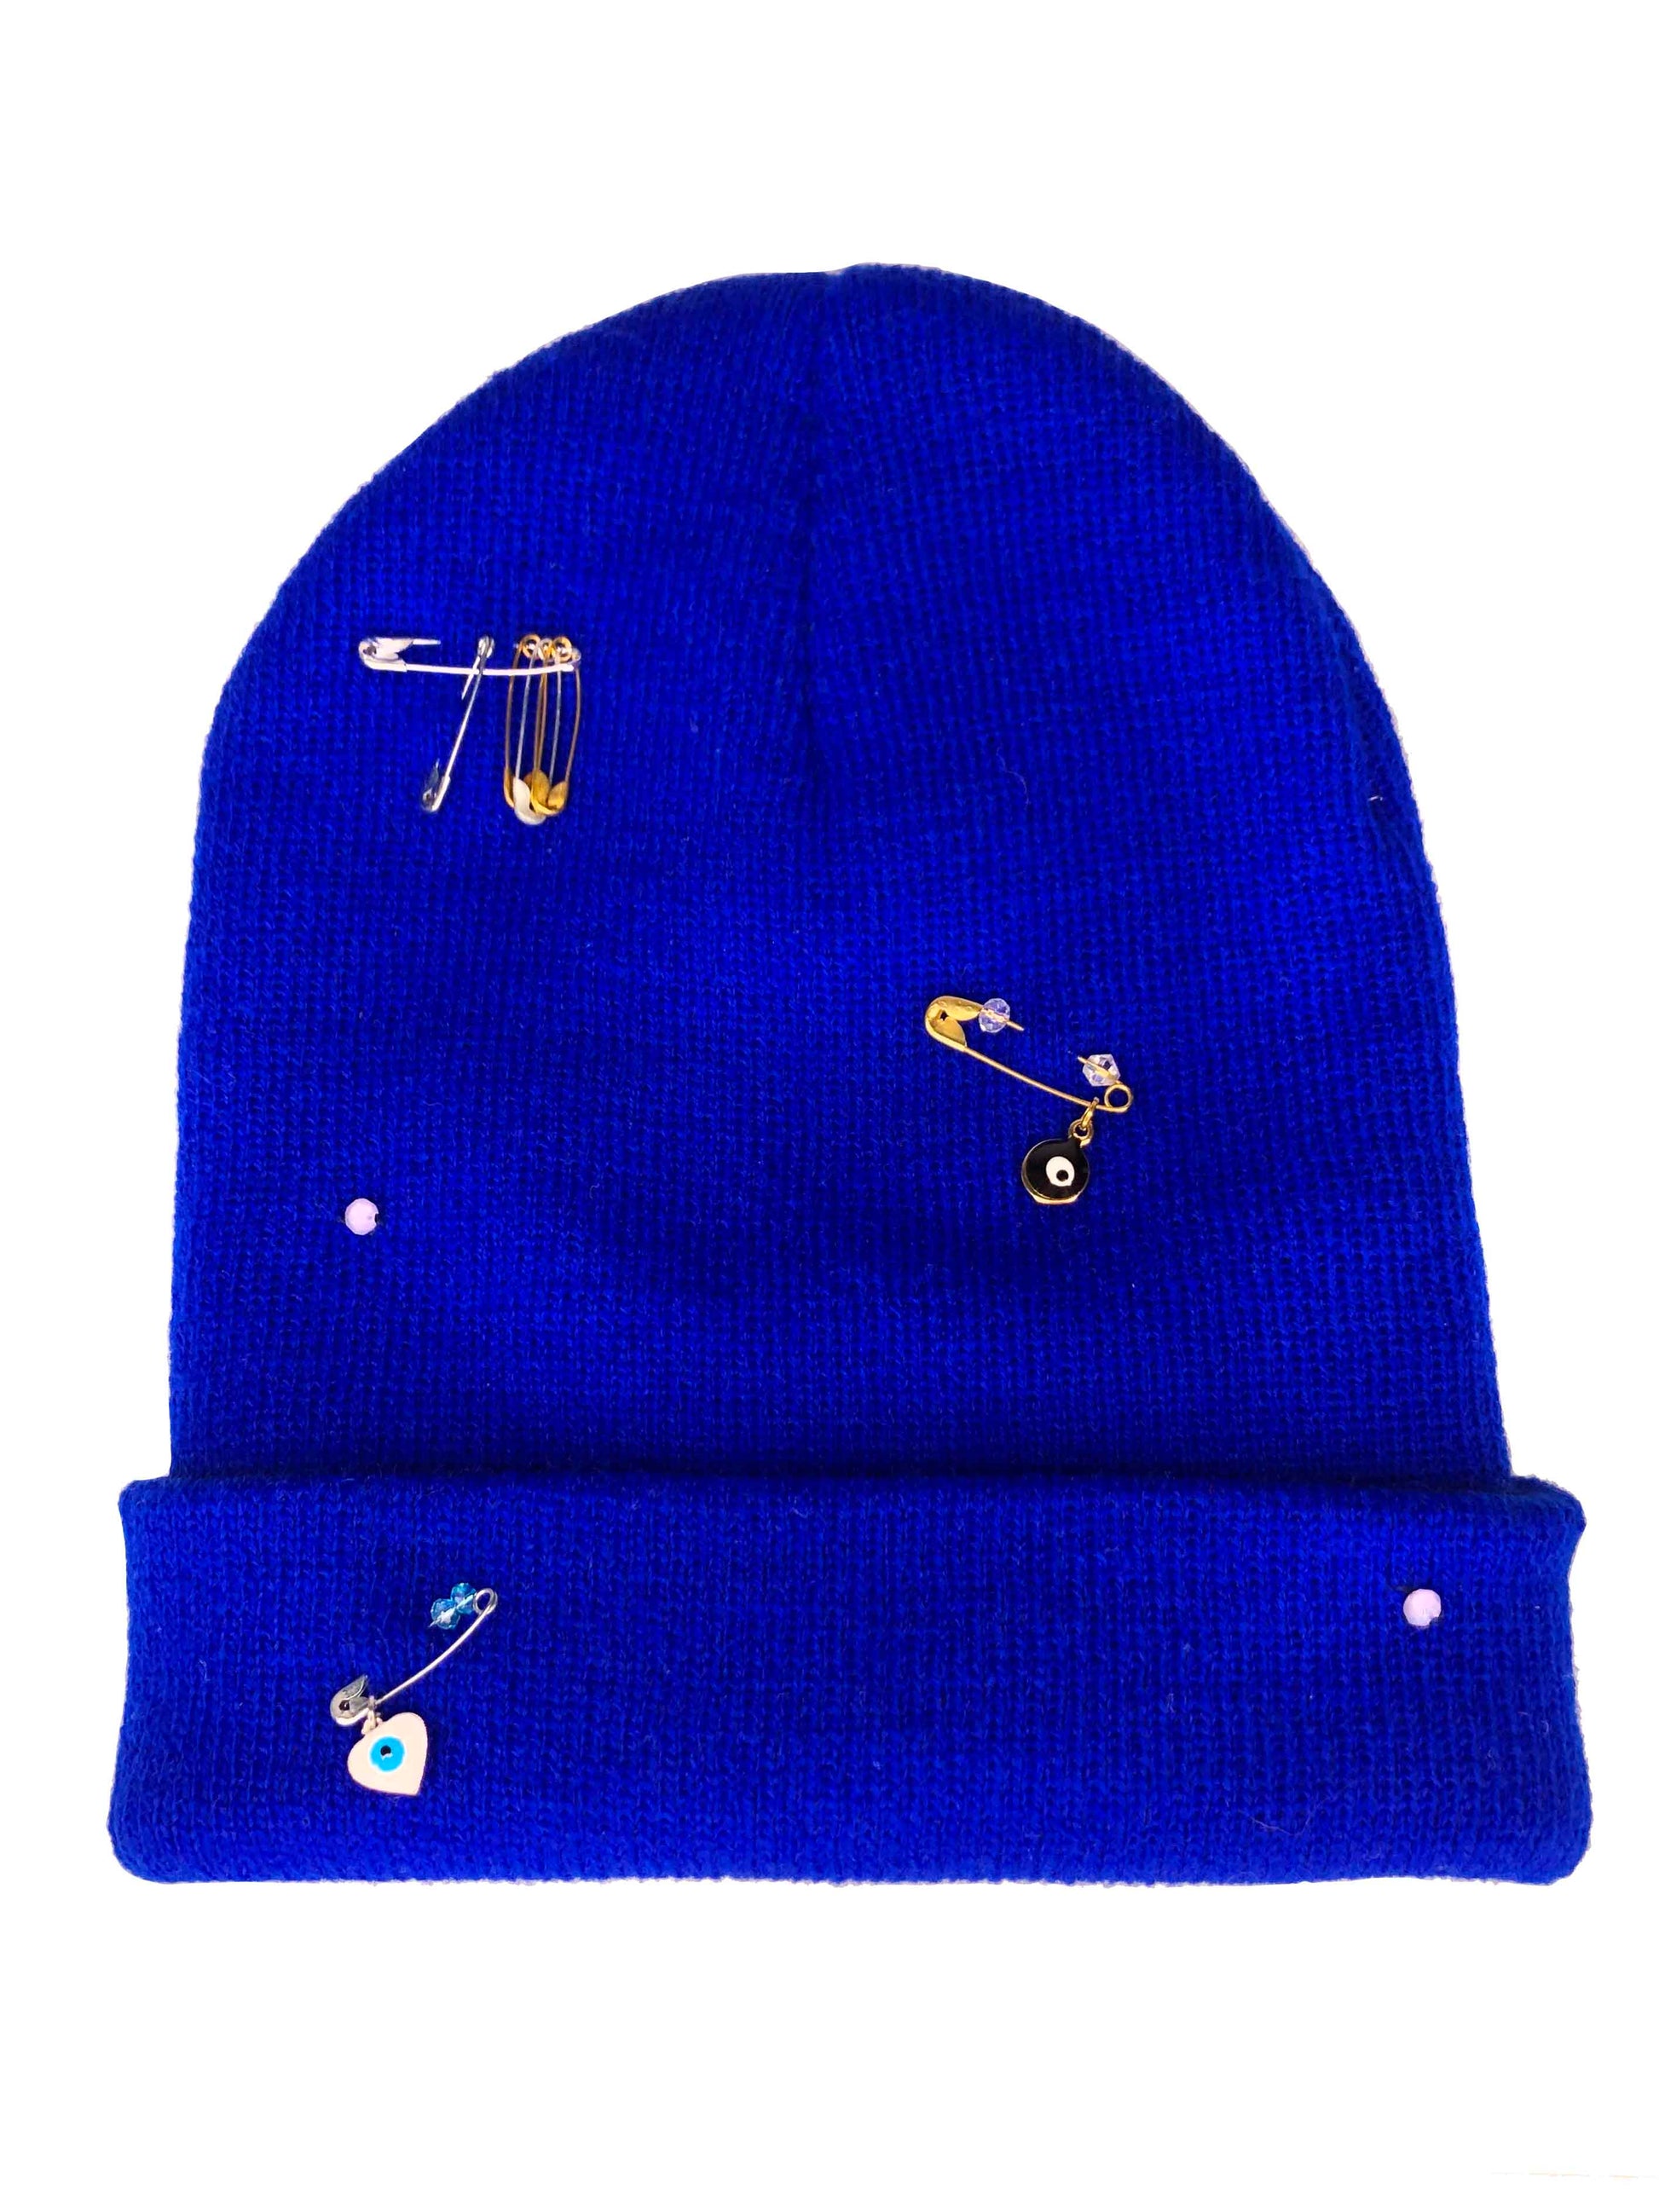 A blue wool knit beanie decorated with safety pins, evil eye charms and crystal beads.